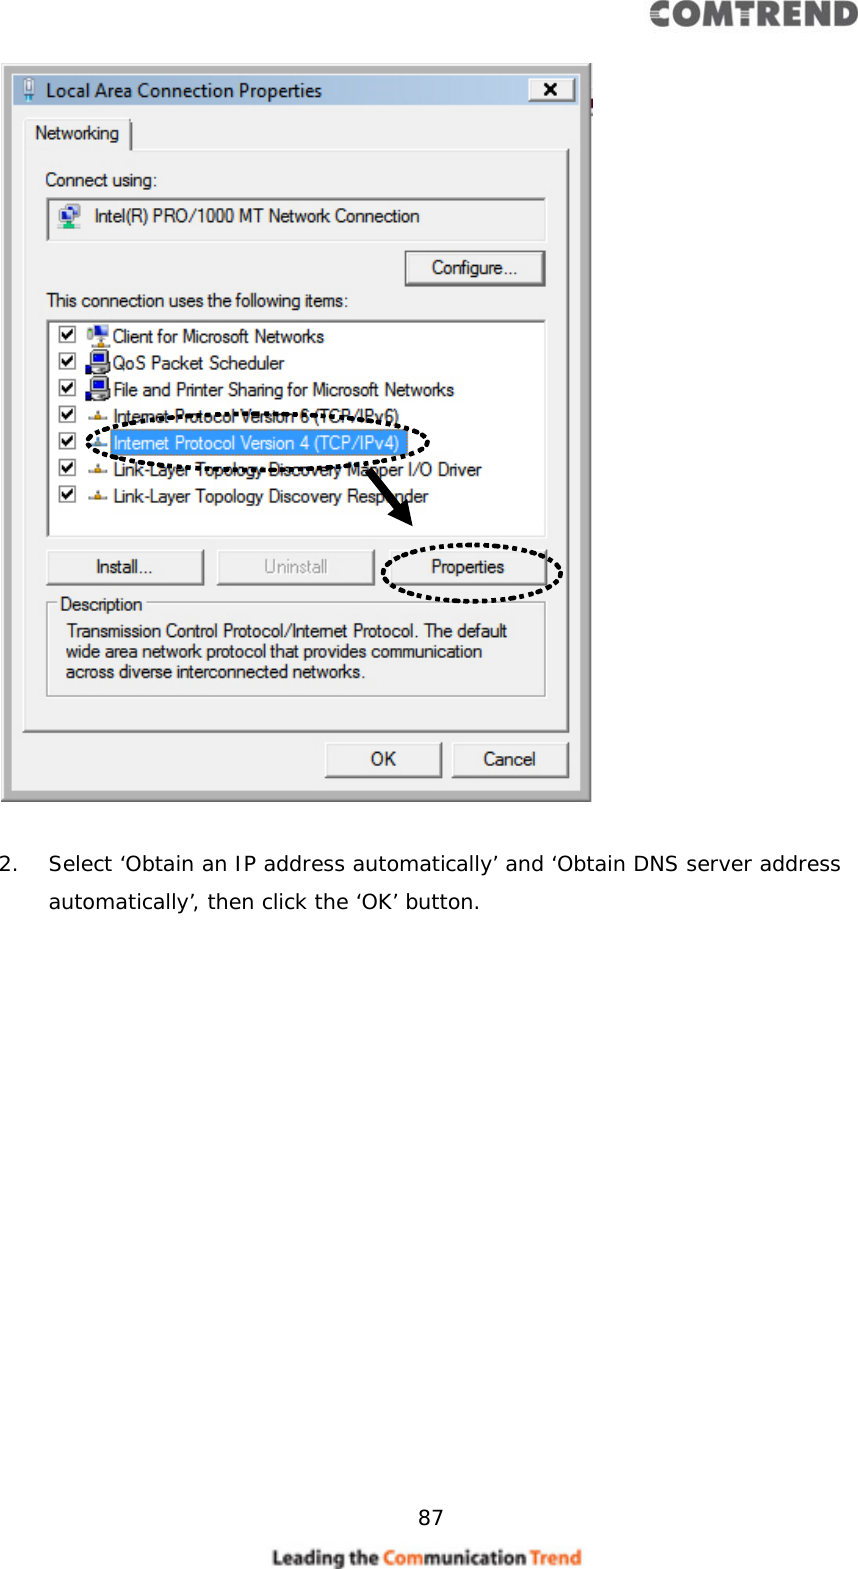     87    2. Select ‘Obtain an IP address automatically’ and ‘Obtain DNS server address automatically’, then click the ‘OK’ button.  